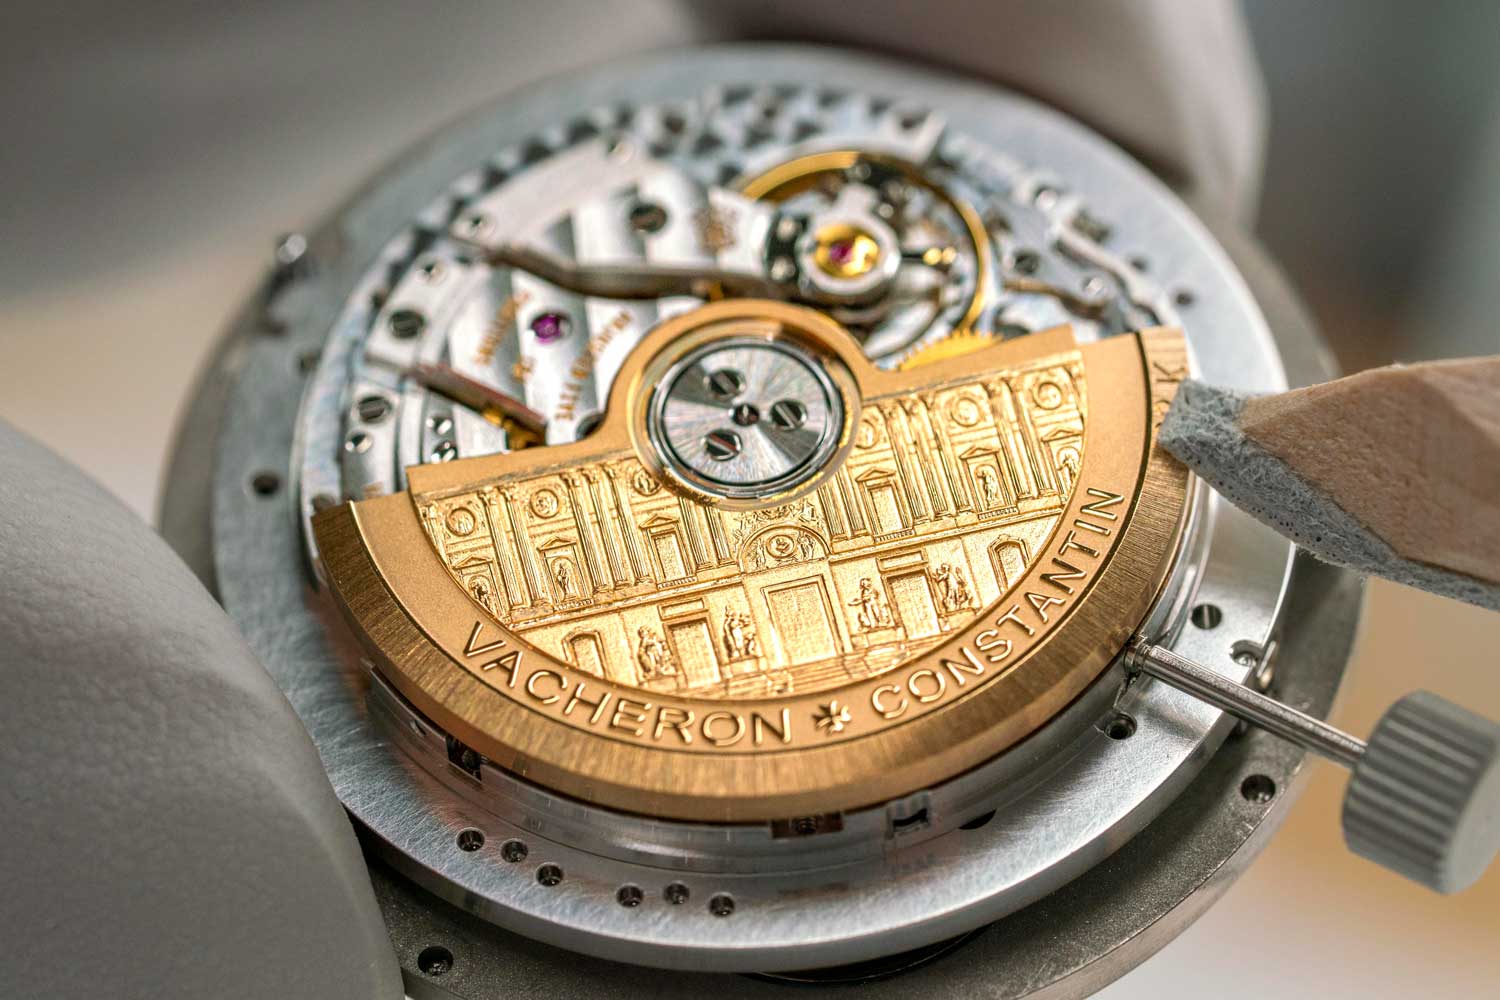 22k pink gold oscillating weight with the Lourve eastern façade engraving before casing-up